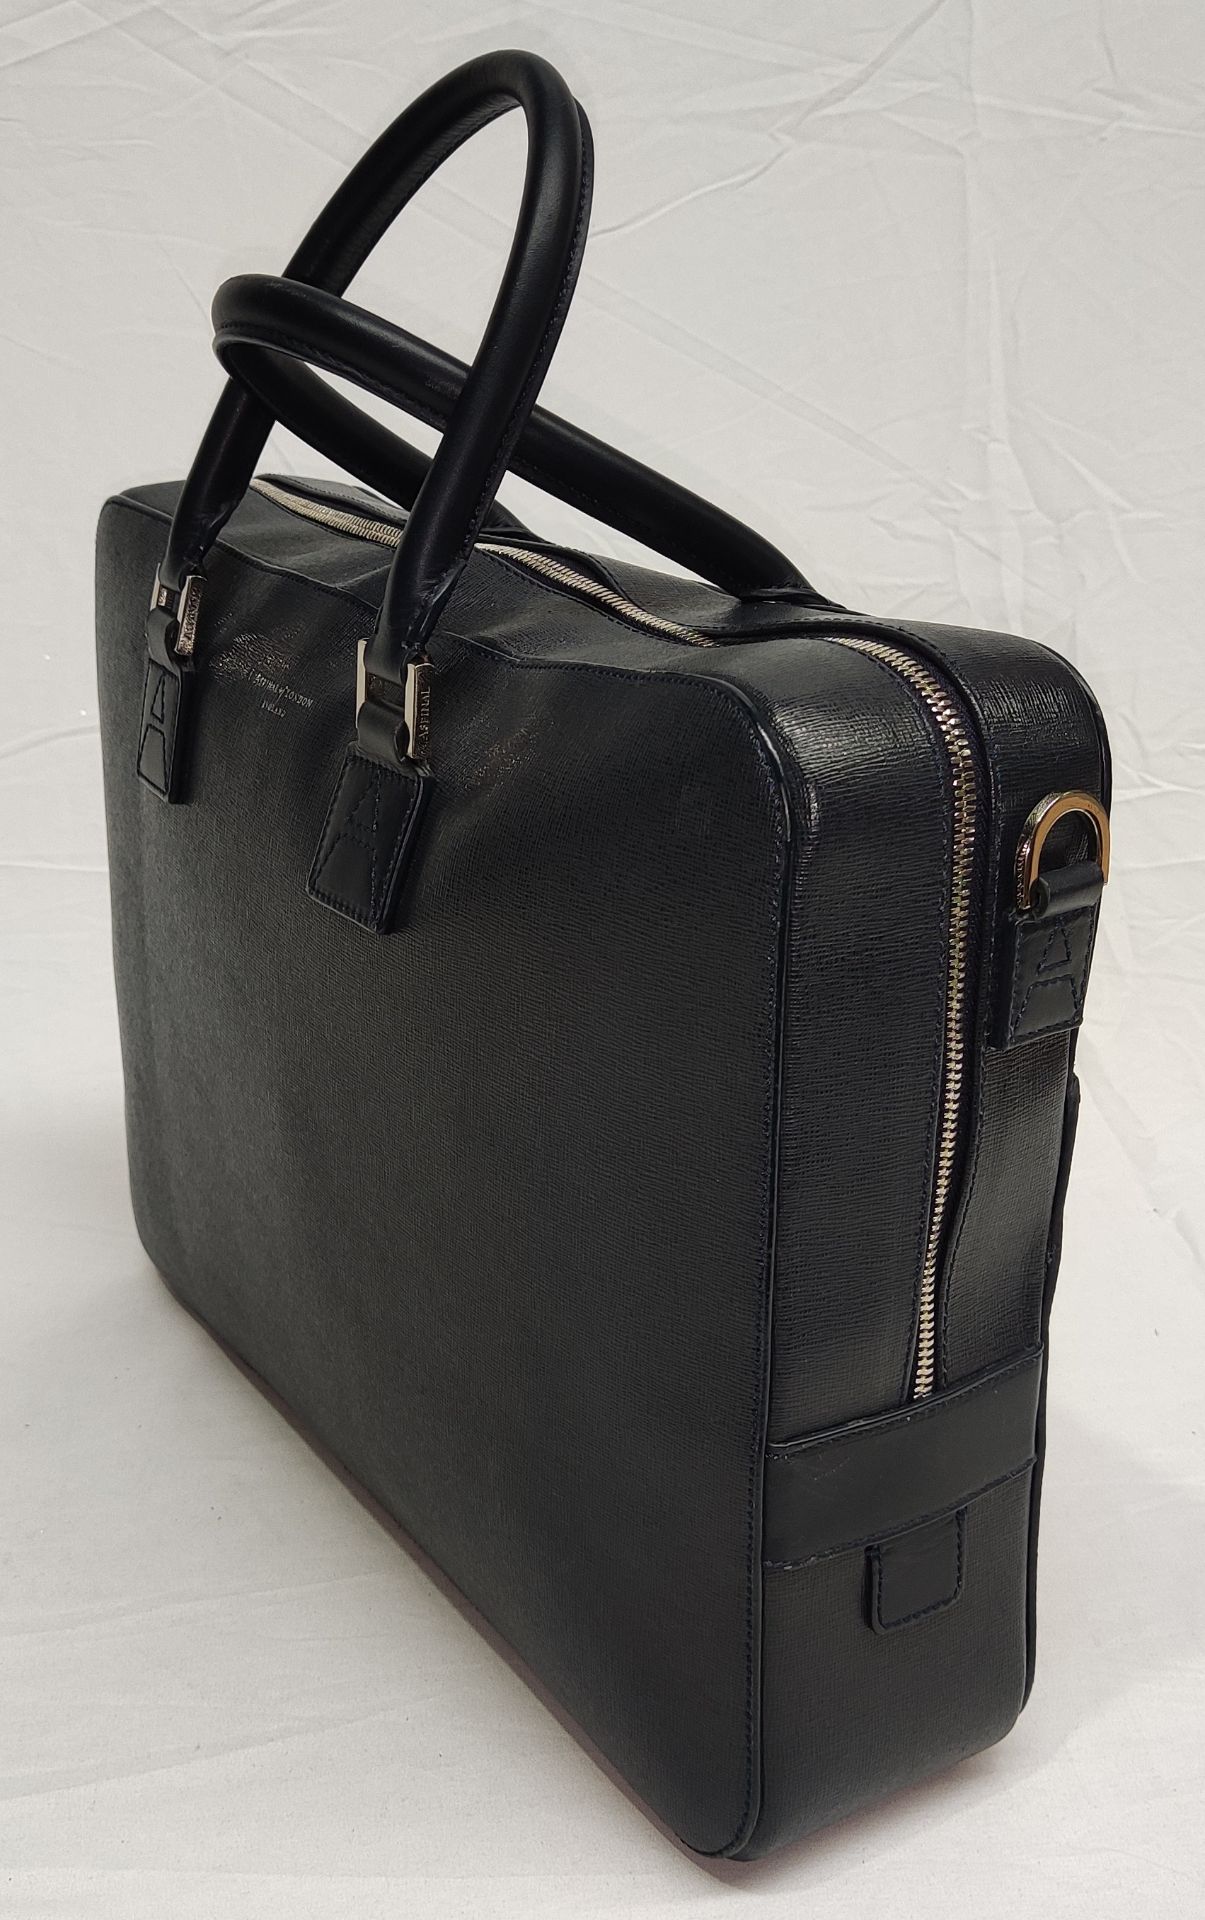 1 x ASPINAL OF LONDON Mount Street Small Laptop Bag In Black Saffiano - Original RRP £650 - Ref: - Image 6 of 21